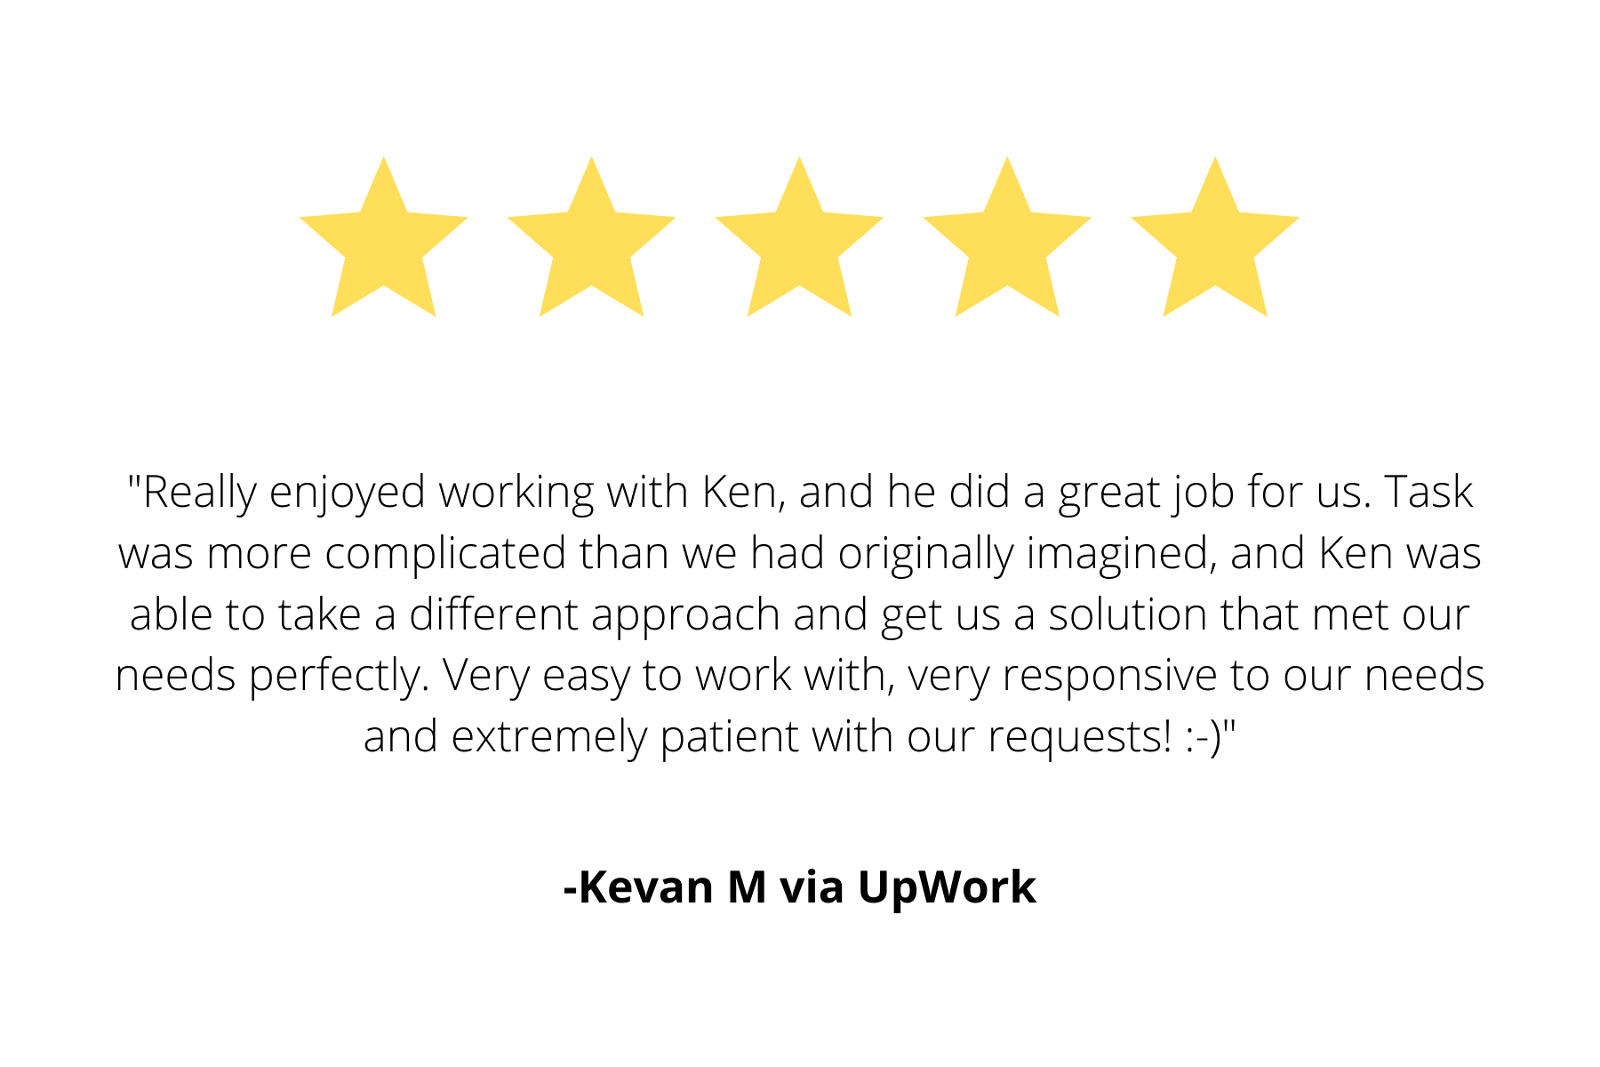 "Really enjoyed working with Ken, and he did a great job for us. Task was more complicated than we had originally imagined, and Ken was able to take a different approach and get us a solution that met our needs perfectly. Very easy to work with, very responsive to our needs and extremely patient with our requests! :-)"